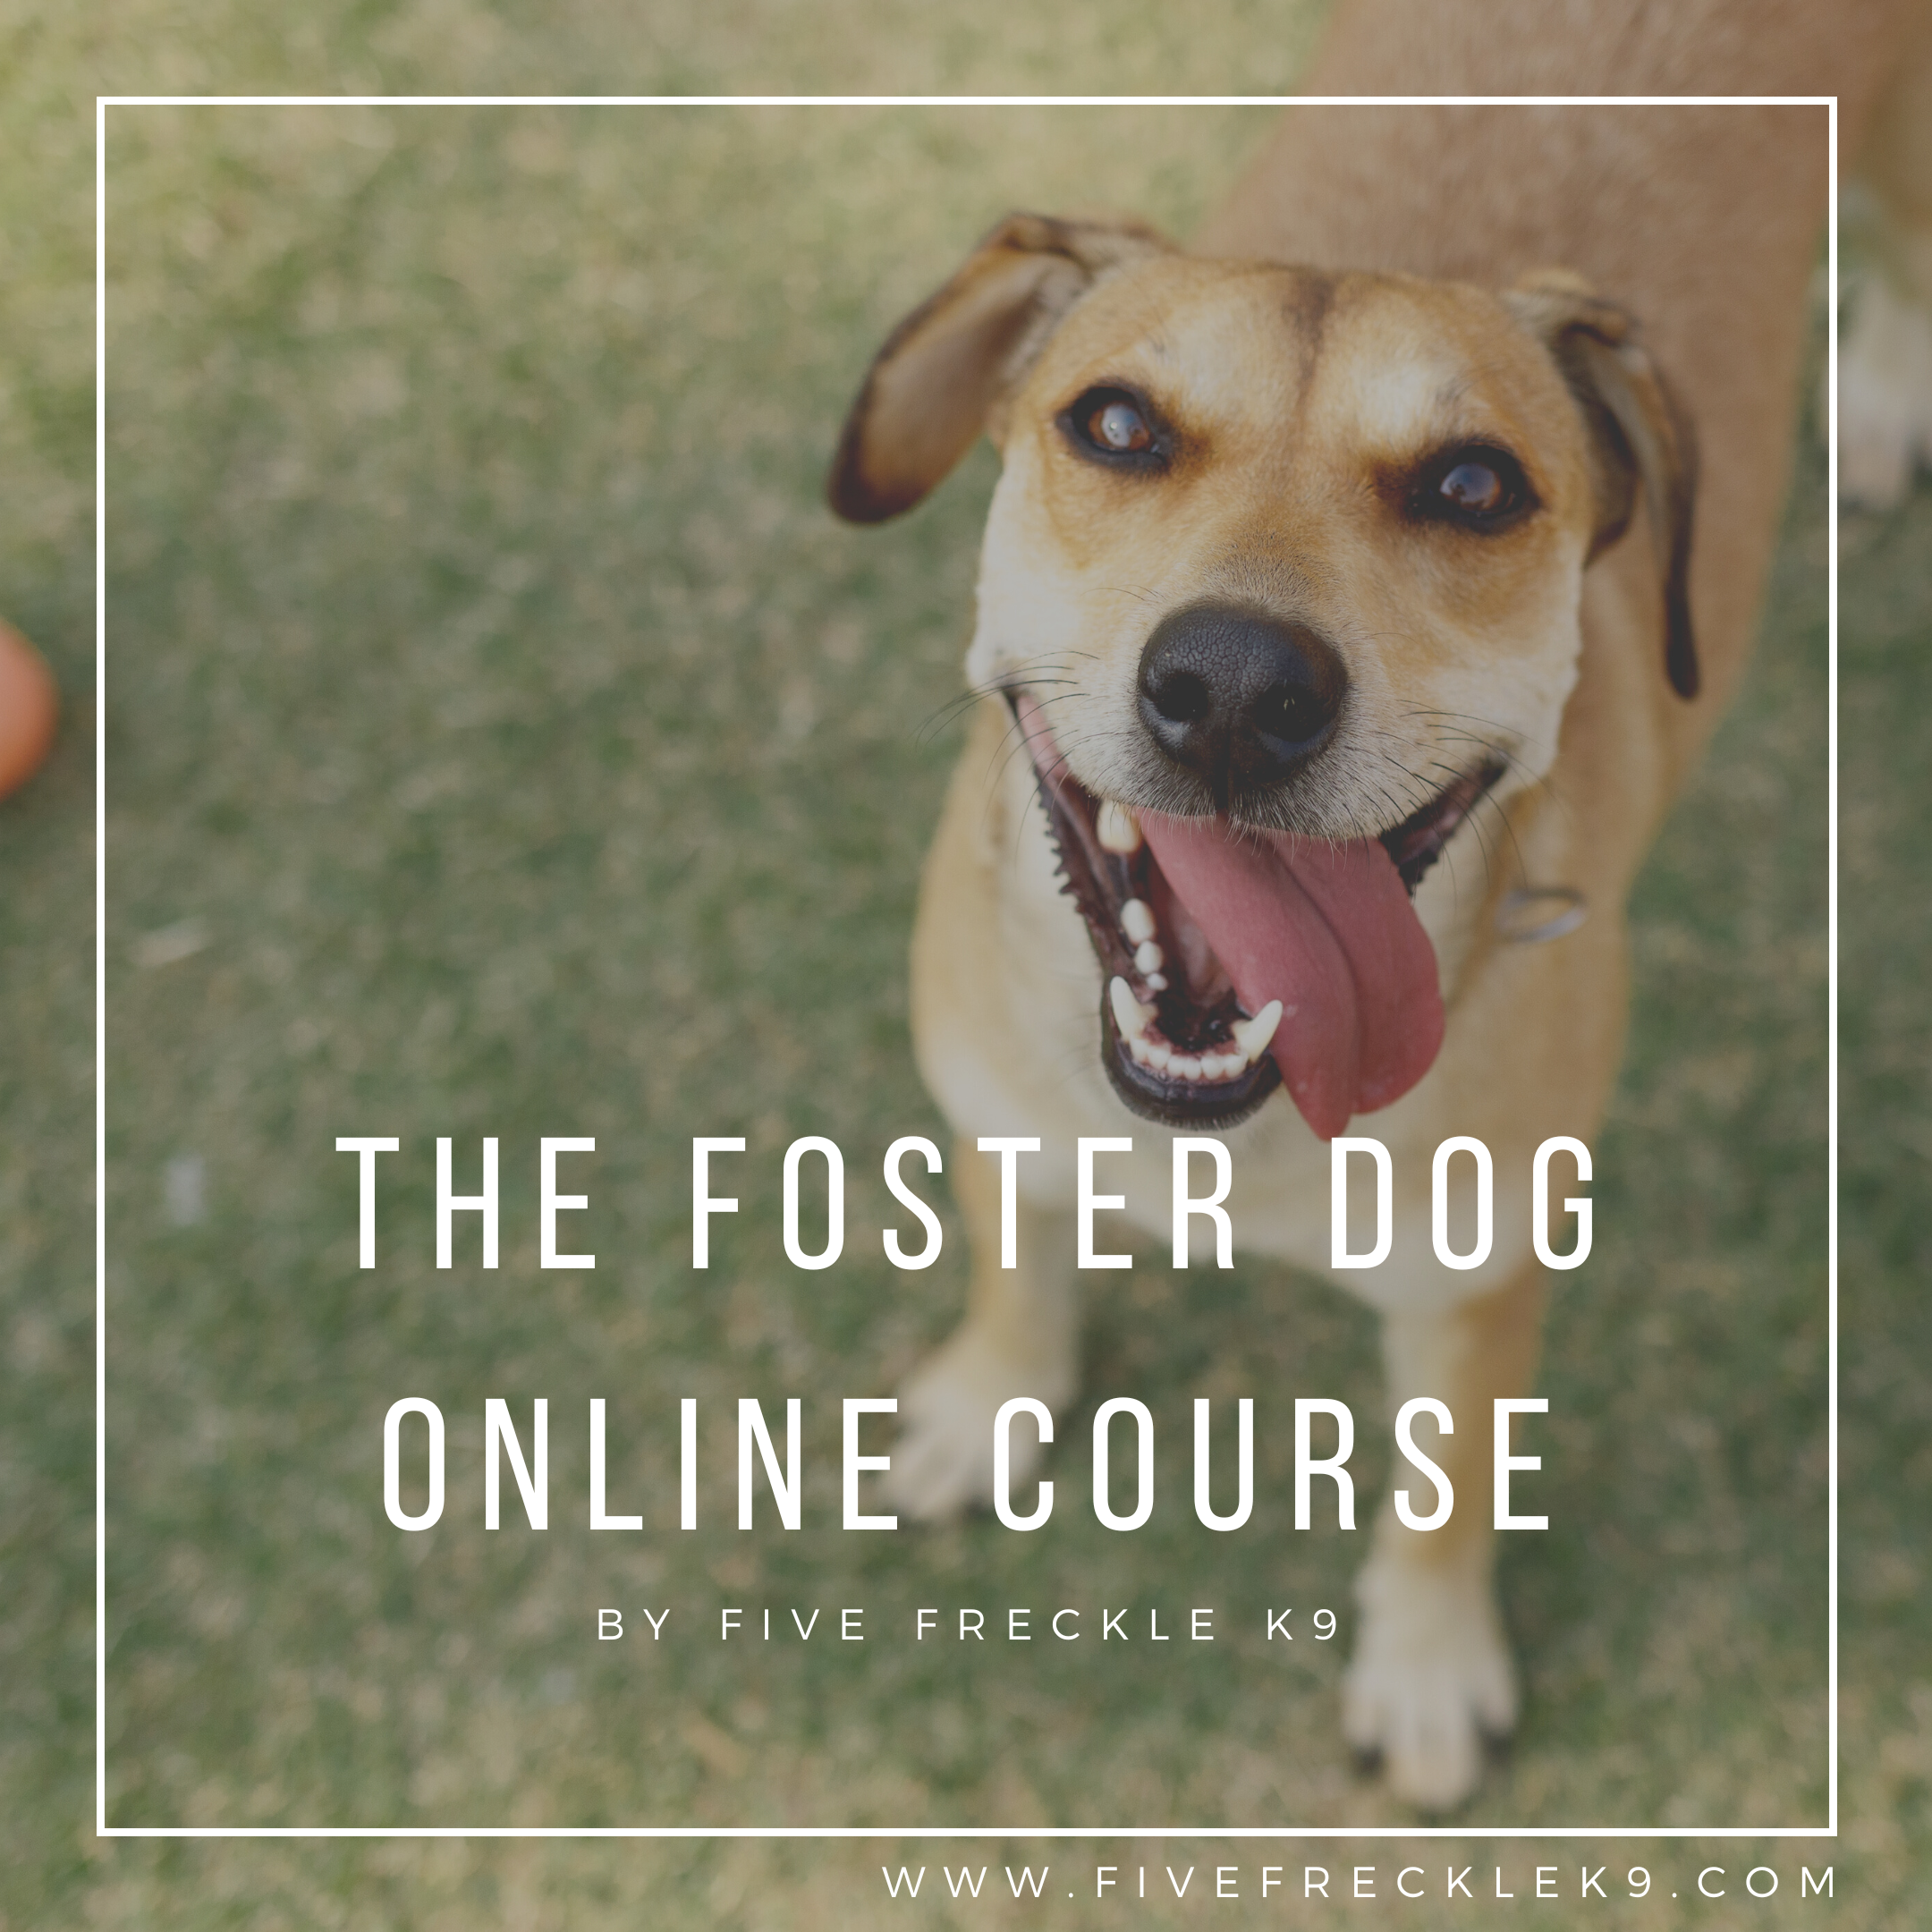 Purchase Online Course - Fostering a Dog